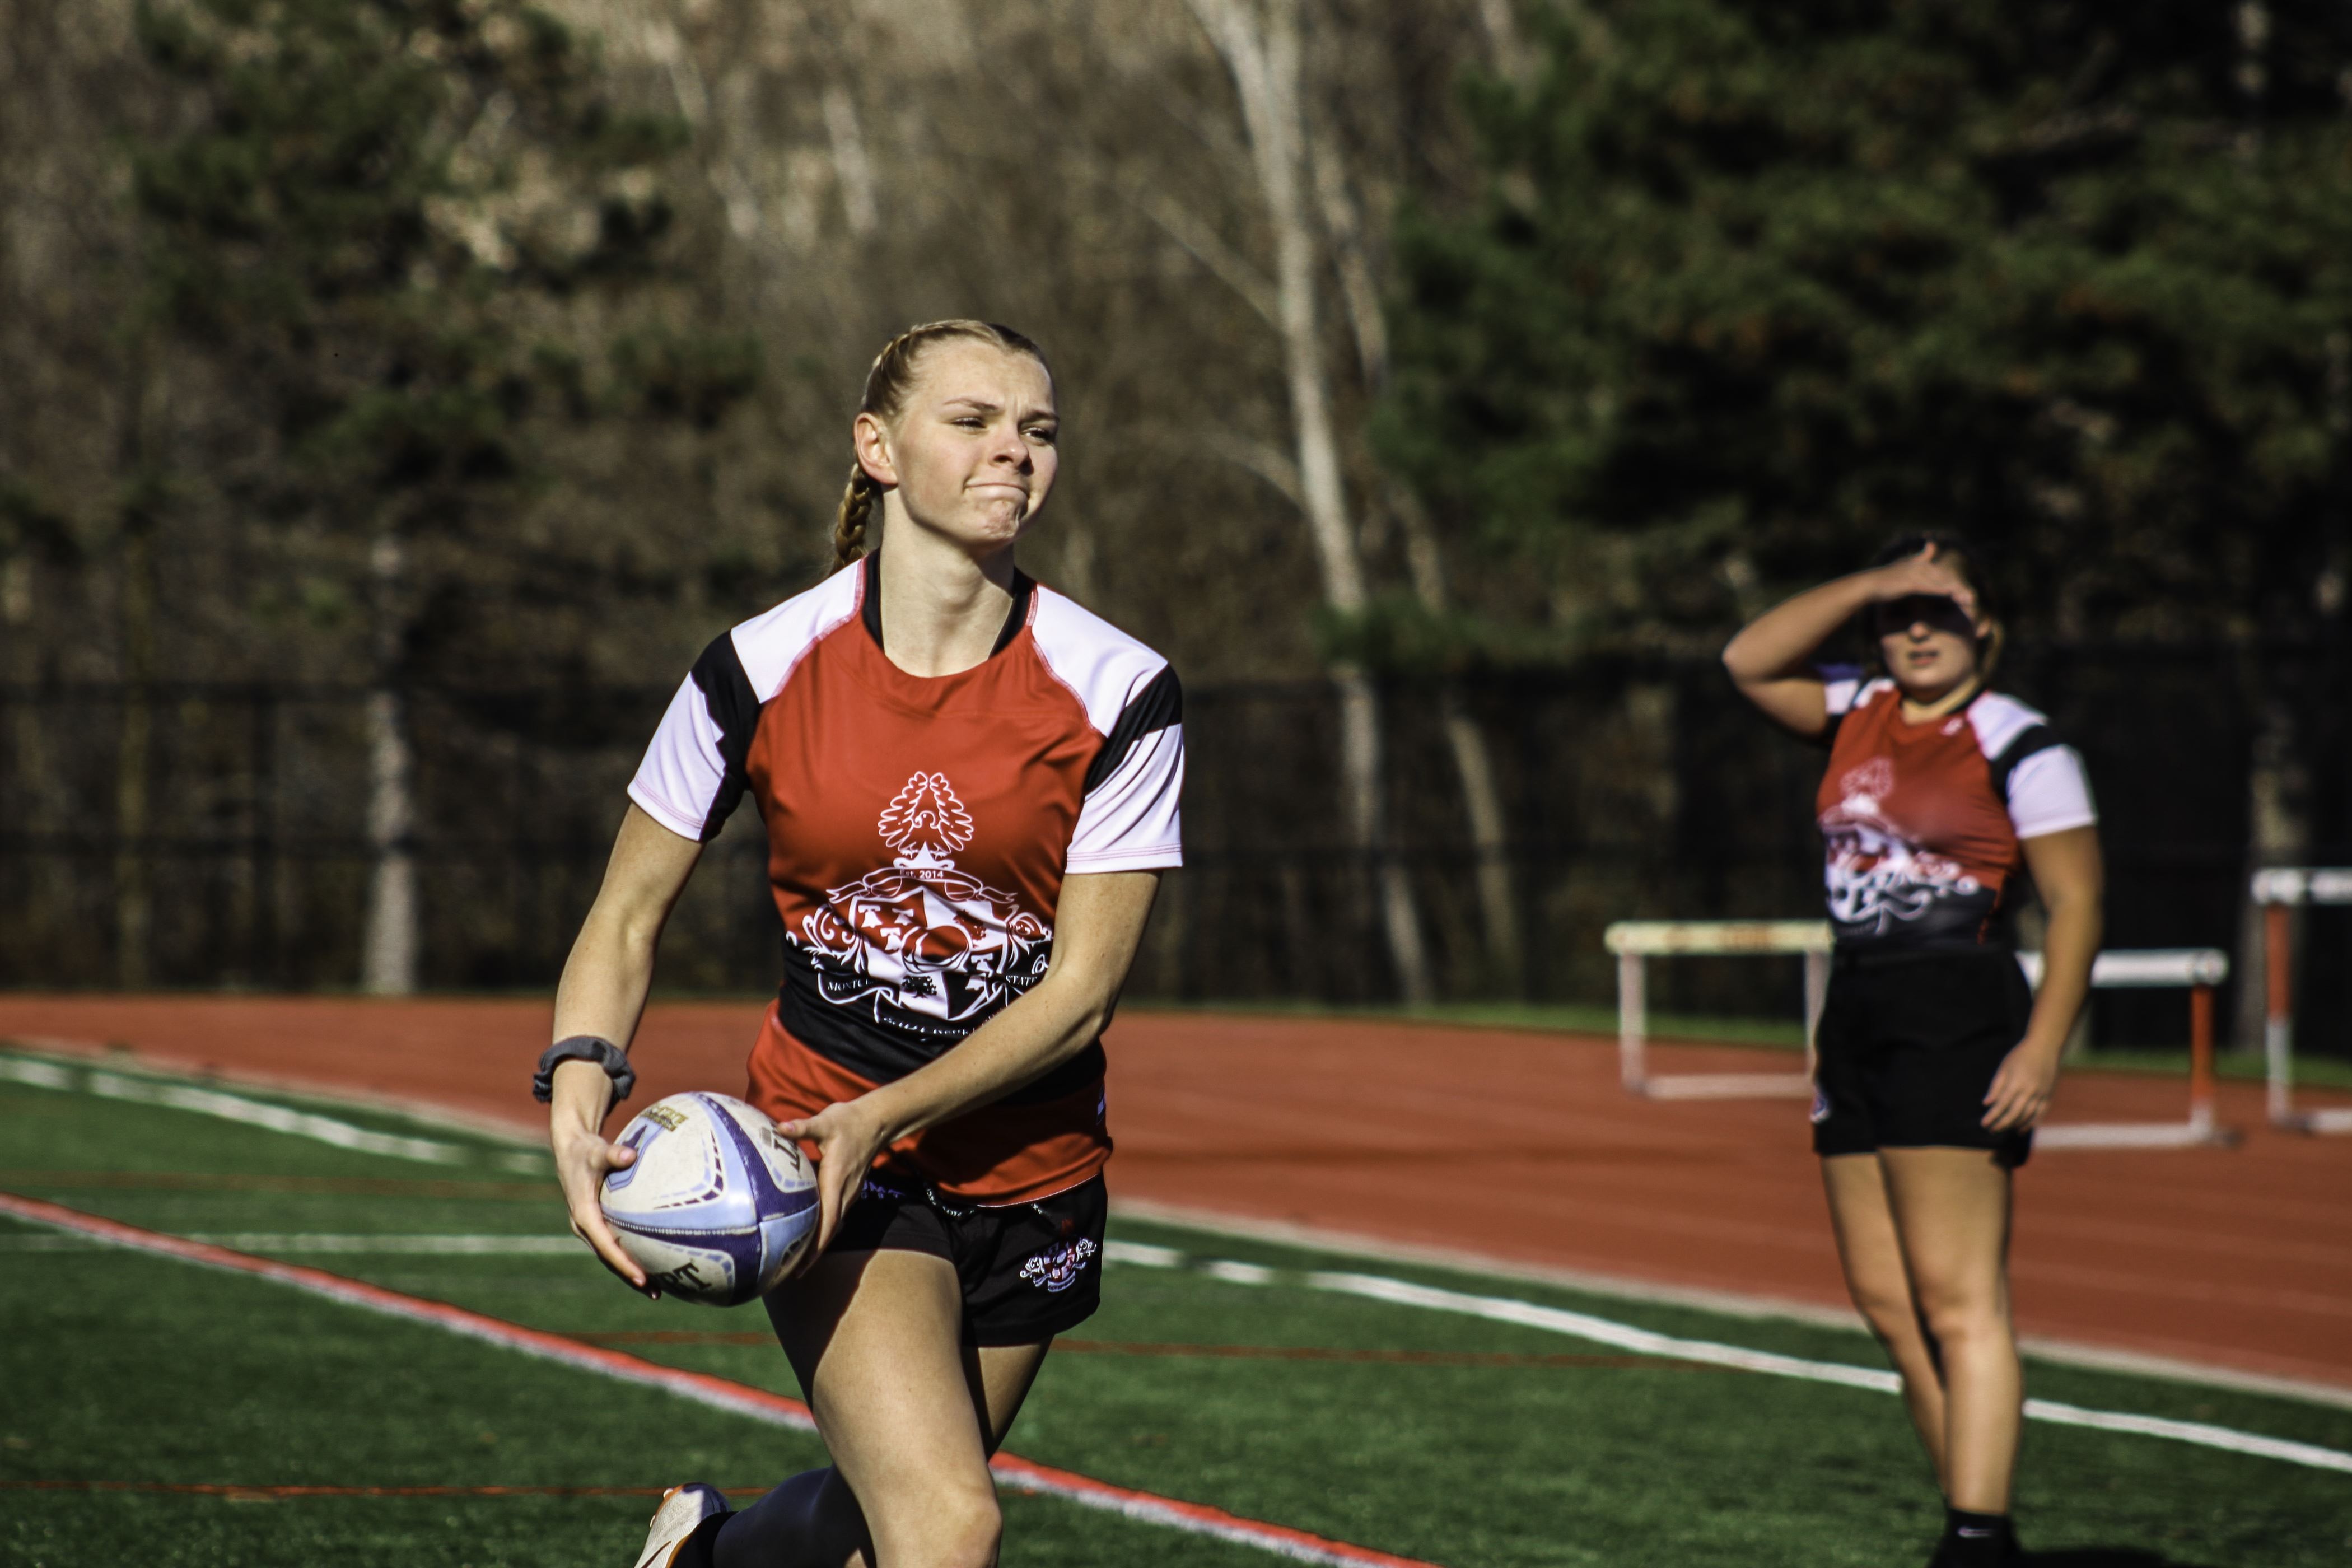 Junior scrumhalf Jadyn Hermanns looks to pass during a warm-up drill before the start of the team's intrasquad scrimmage Corey Annan | The Montclarion